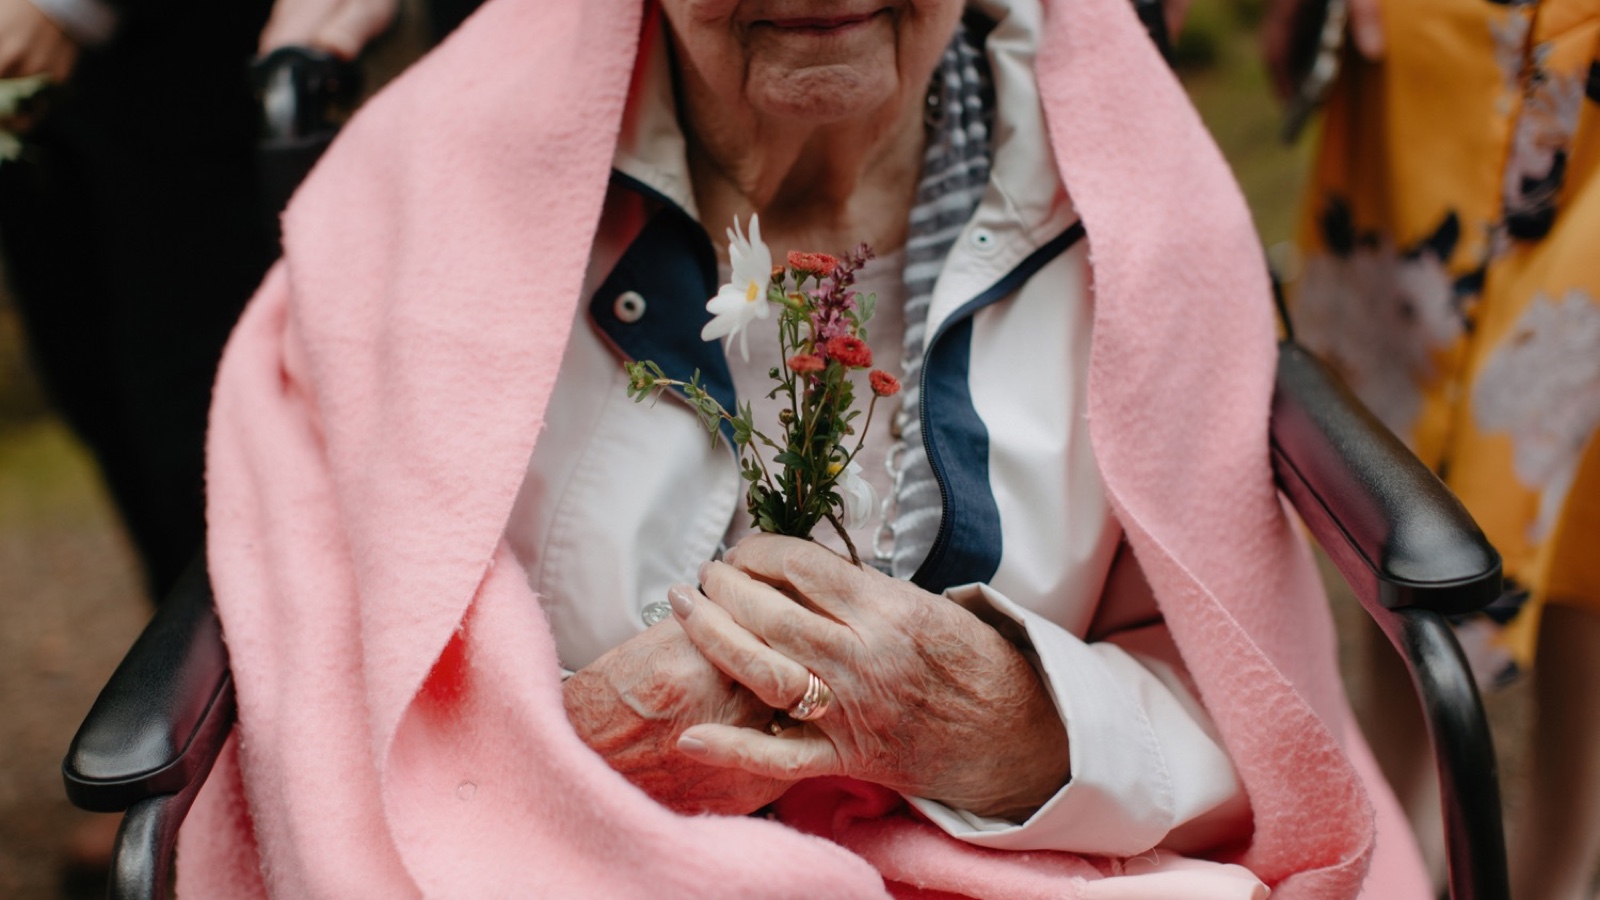 Grandma wrapped in a pink blanket holding onto florals handed to each guest prior to the wedding ceremony